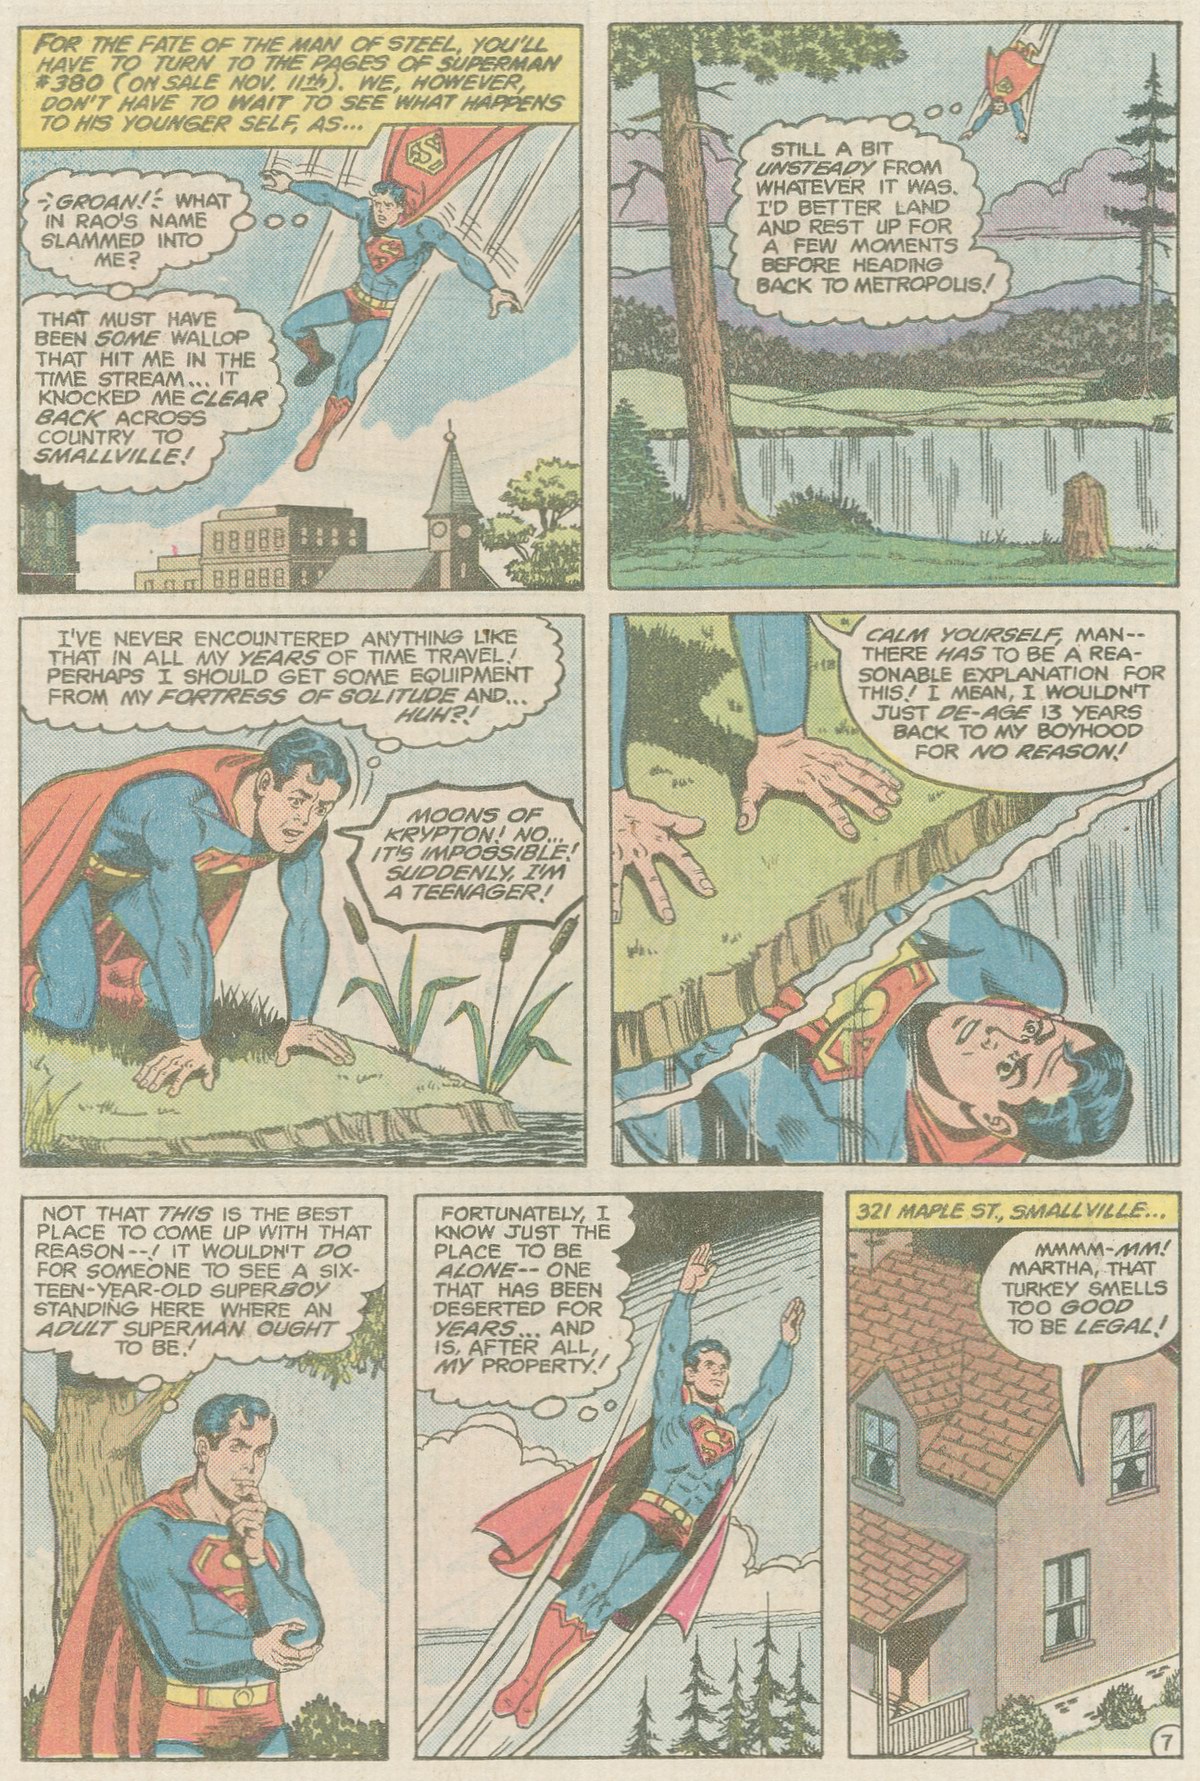 The New Adventures of Superboy 38 Page 7